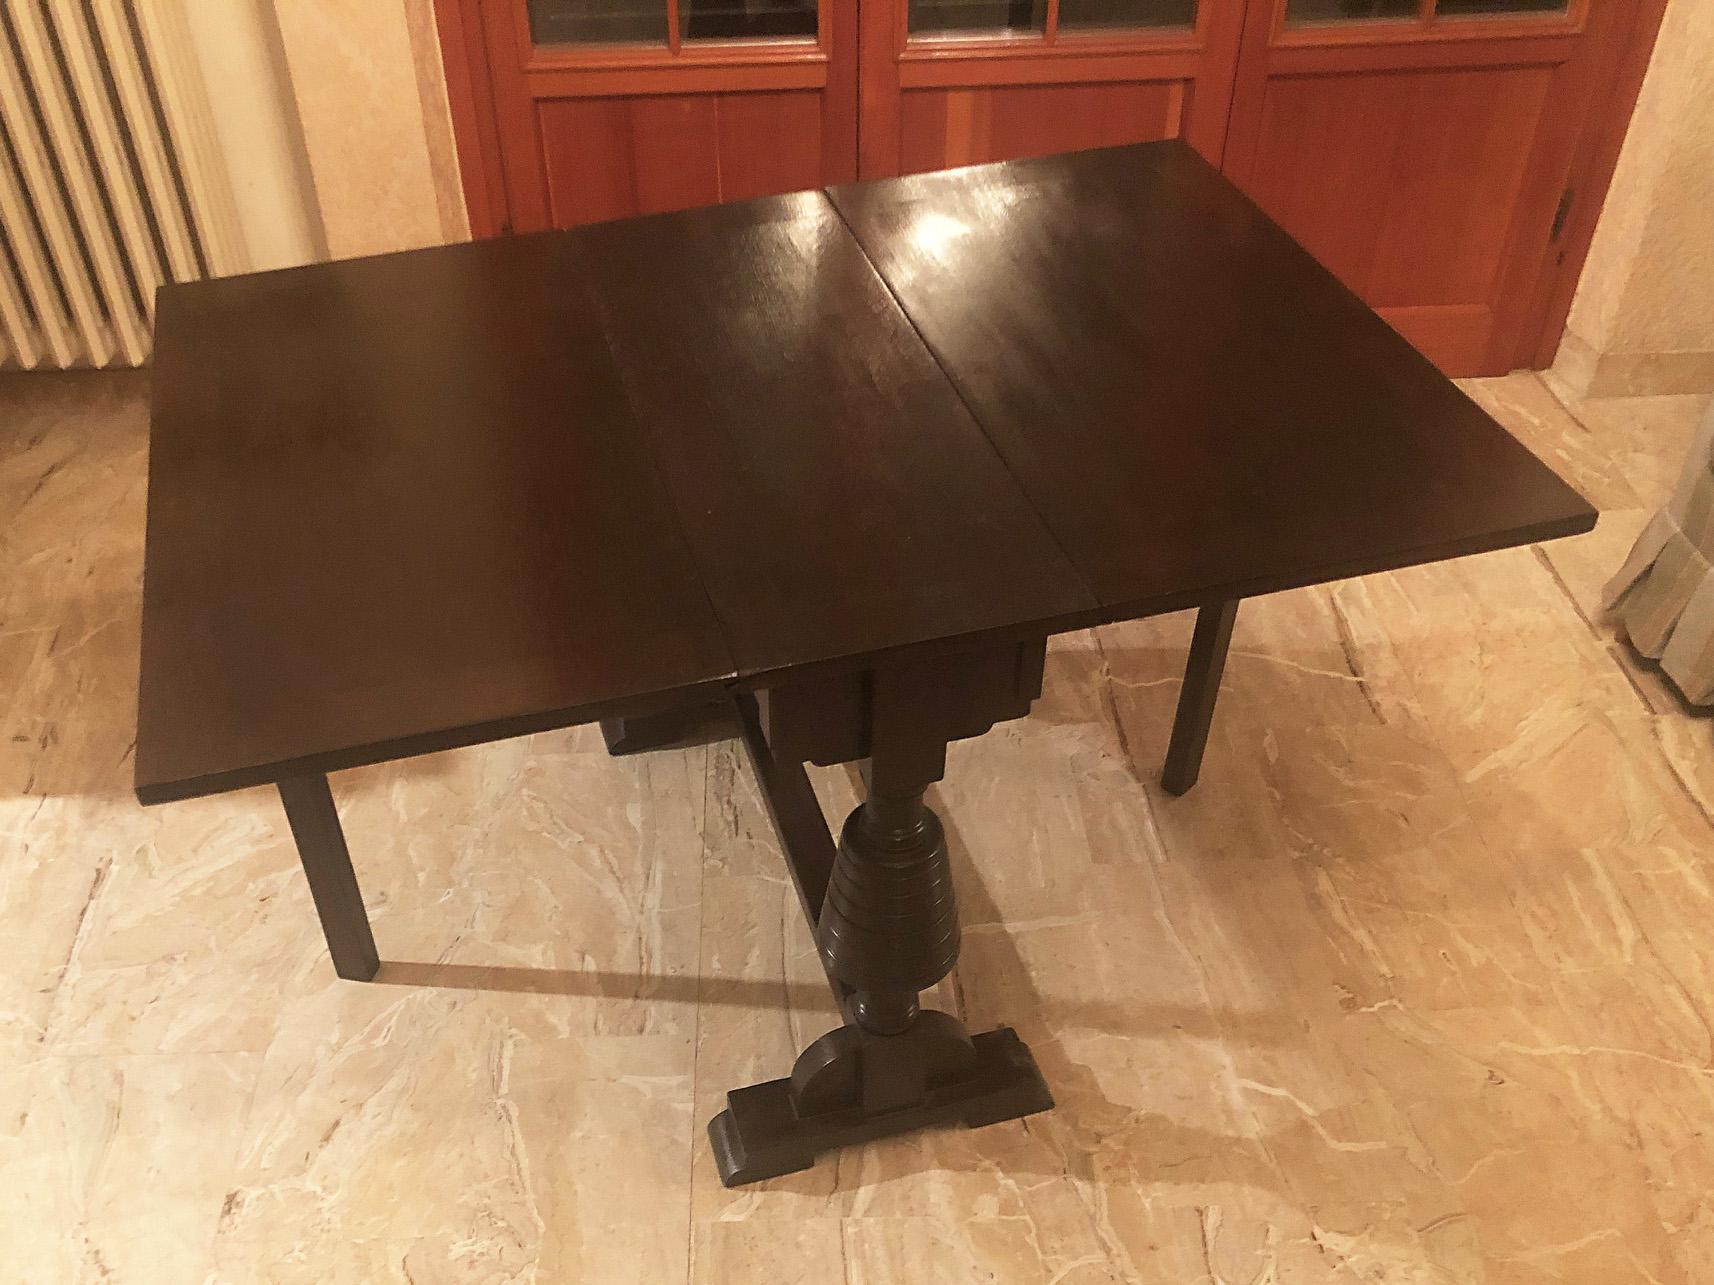 Original oak strip table, beautiful as a console table, dark color.
It can be held in three different length configurations: 34, 78, 122 cm.
They will be delivered in a specific wooden case for export, packed in bubble wrap.
Comes from an old